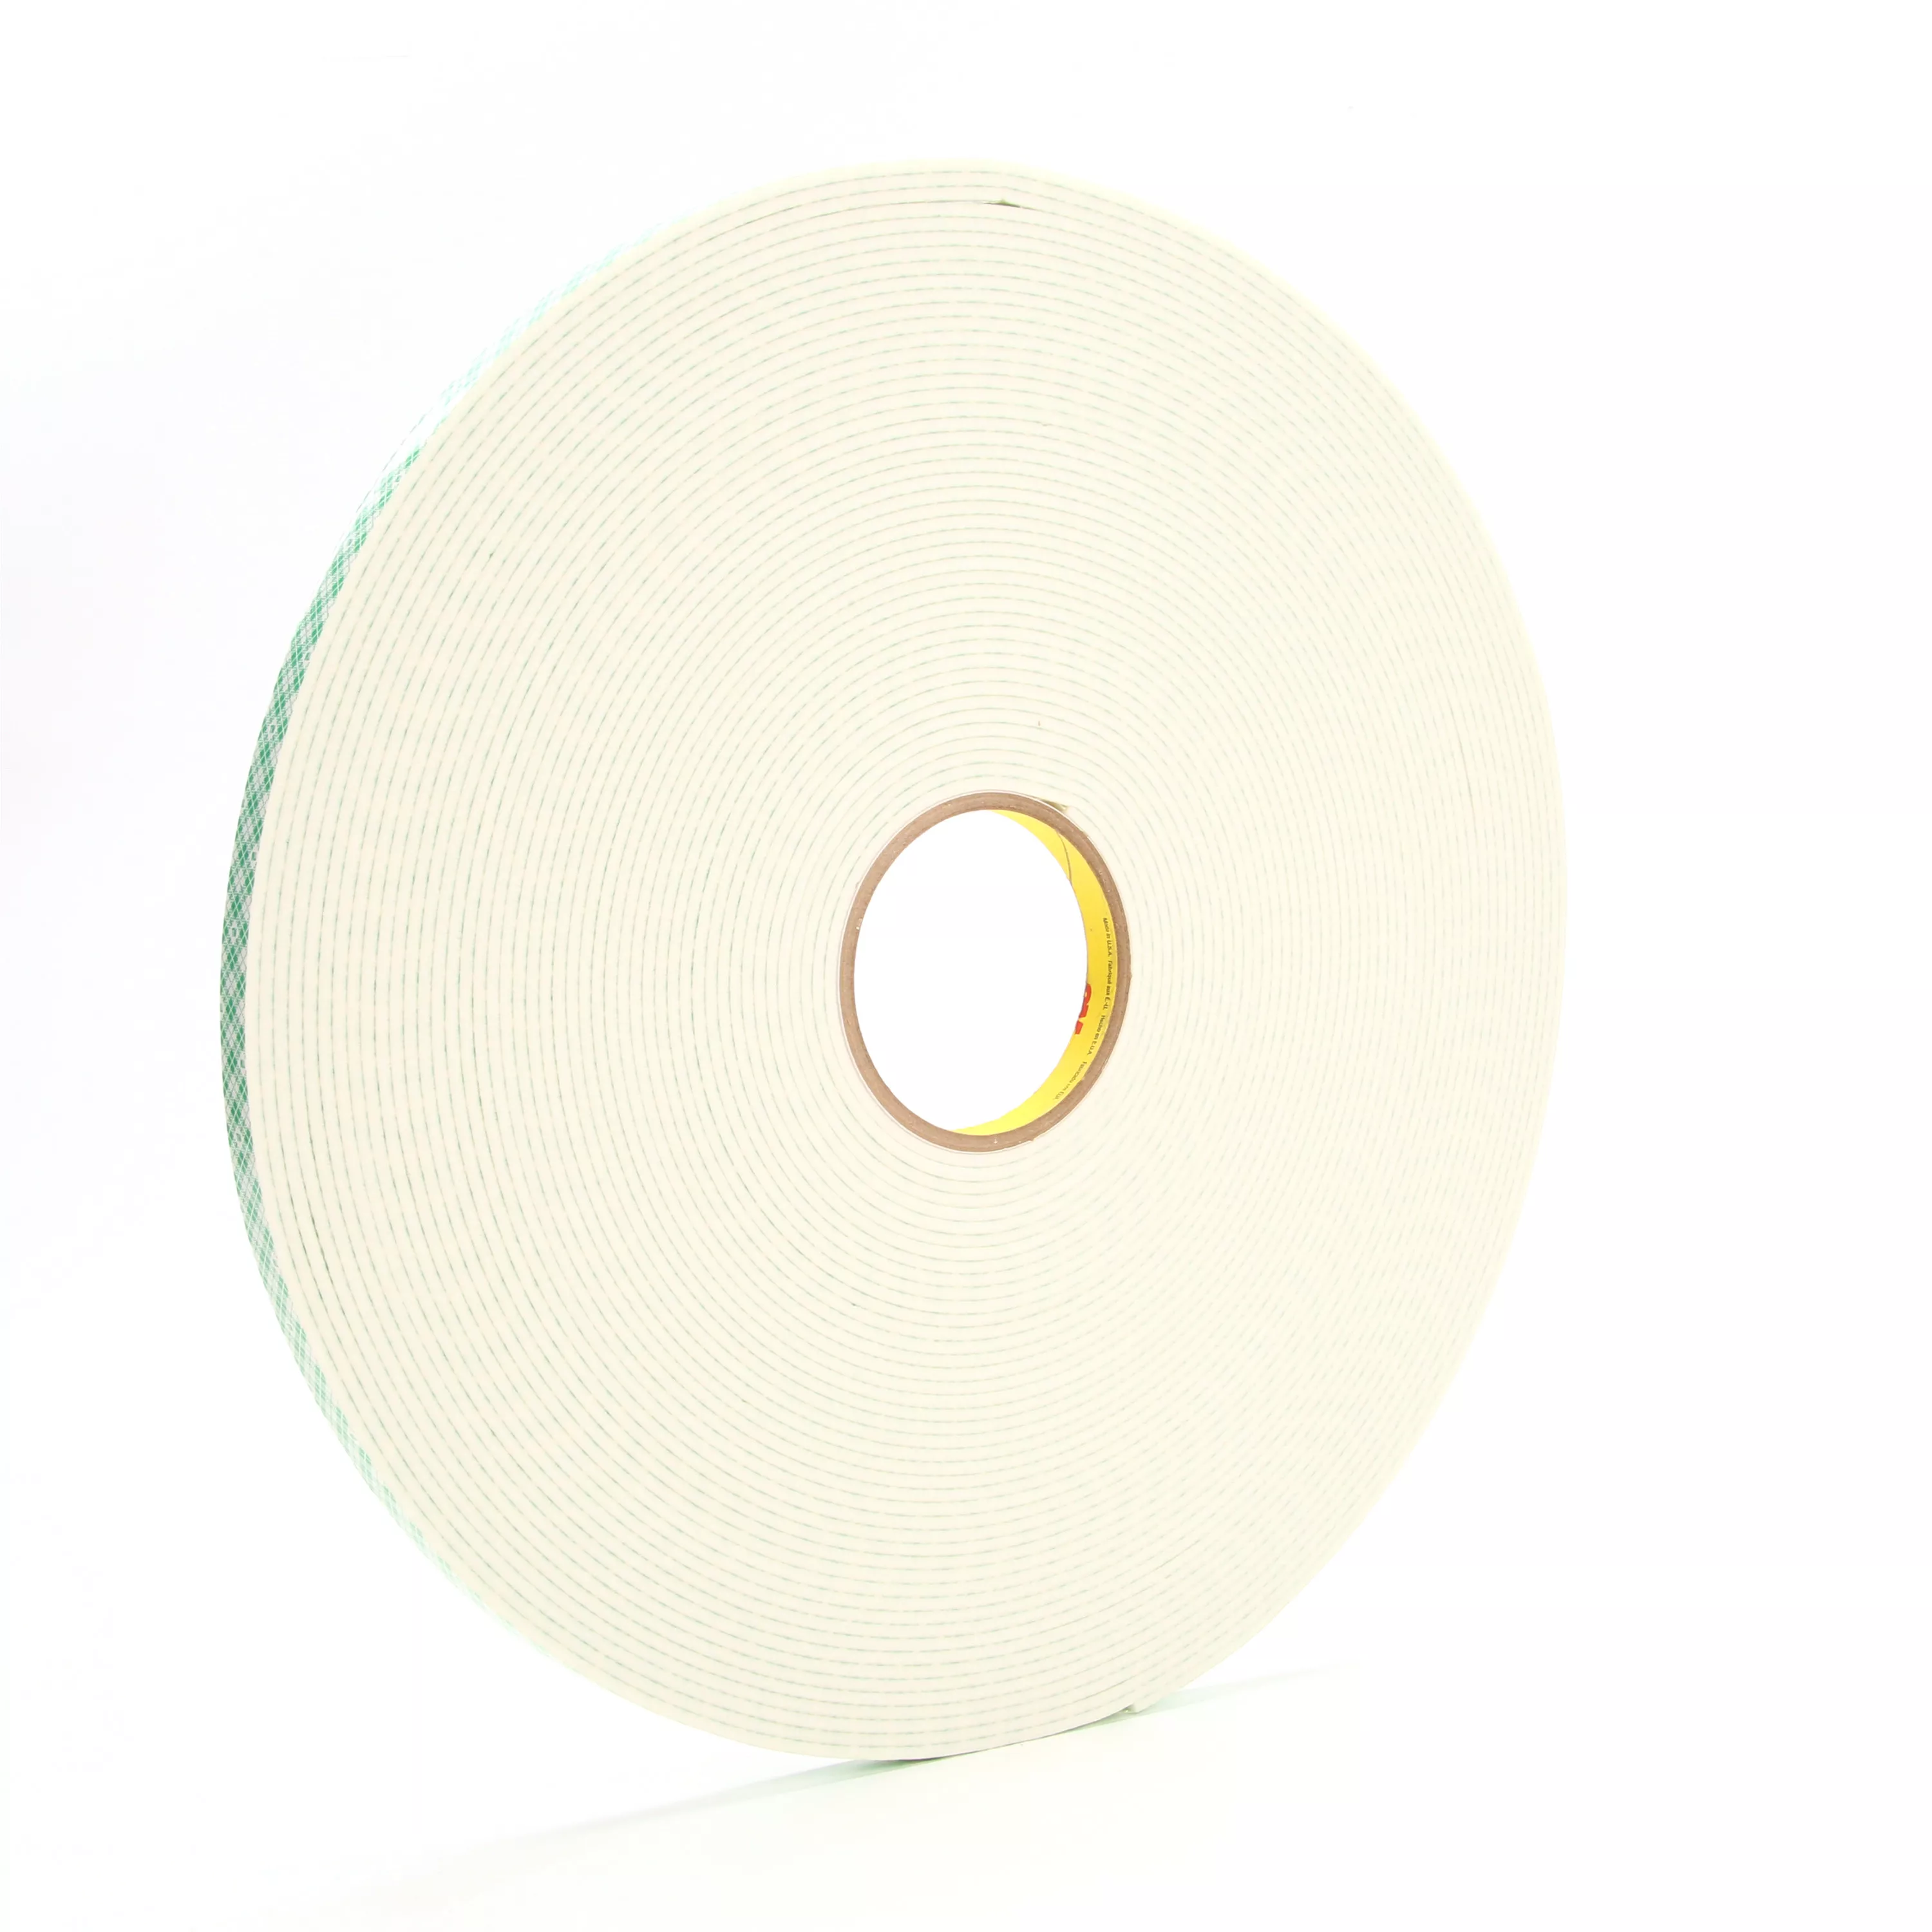 3M™ Double Coated Urethane Foam Tape 4008, Off White, 1/2 in x 36 yd,
125 mil, 18 Roll/Case